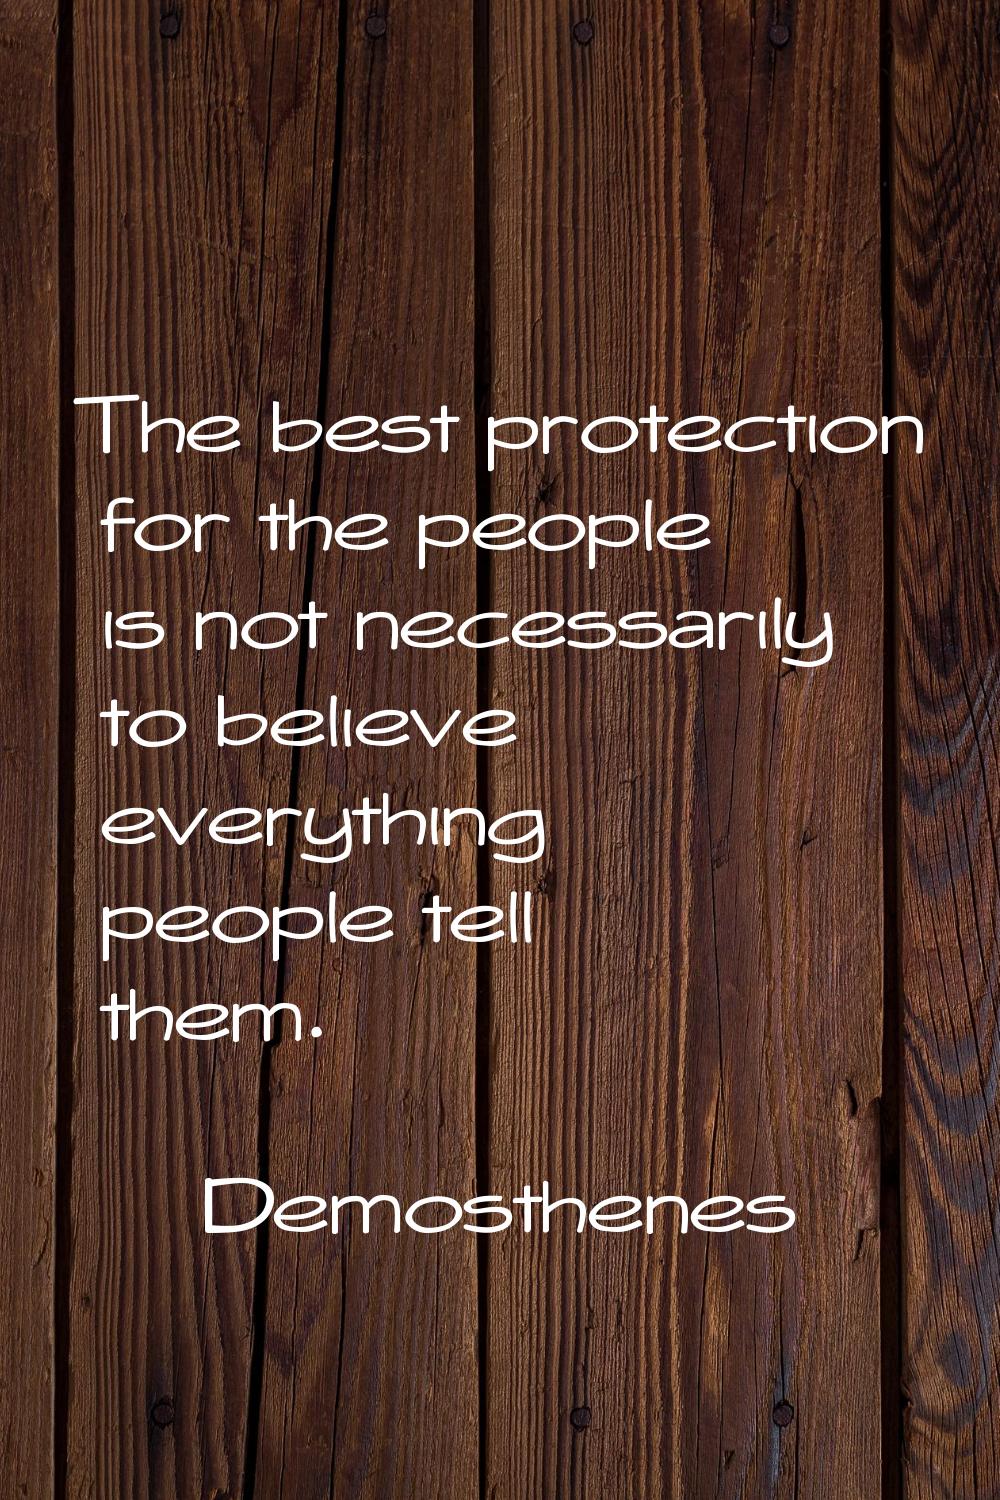 The best protection for the people is not necessarily to believe everything people tell them.